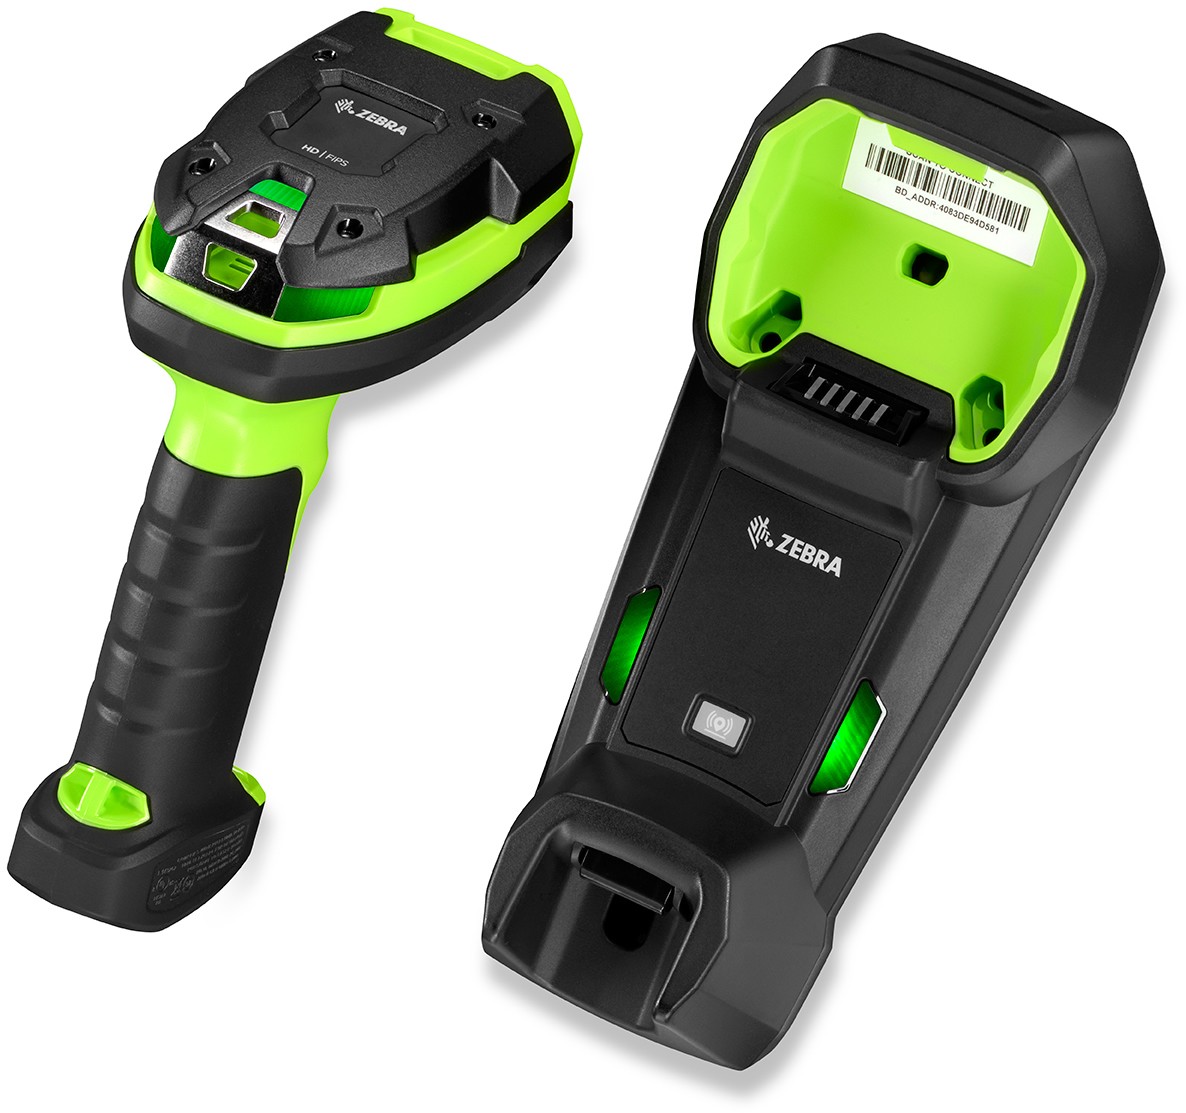 DS3678-HP Rugged Green Standard Cradle USB Kit: DS3678-HP2F003VZWW Scanner, CBA-U42-S07PAR Shielded USB Cable Supports 12V P/S, STB3678-C100F3WW Cradle, PWR-BGA12V50W0WW, CBL-DC-451A1-01 and 23844-00-00R Line Cords